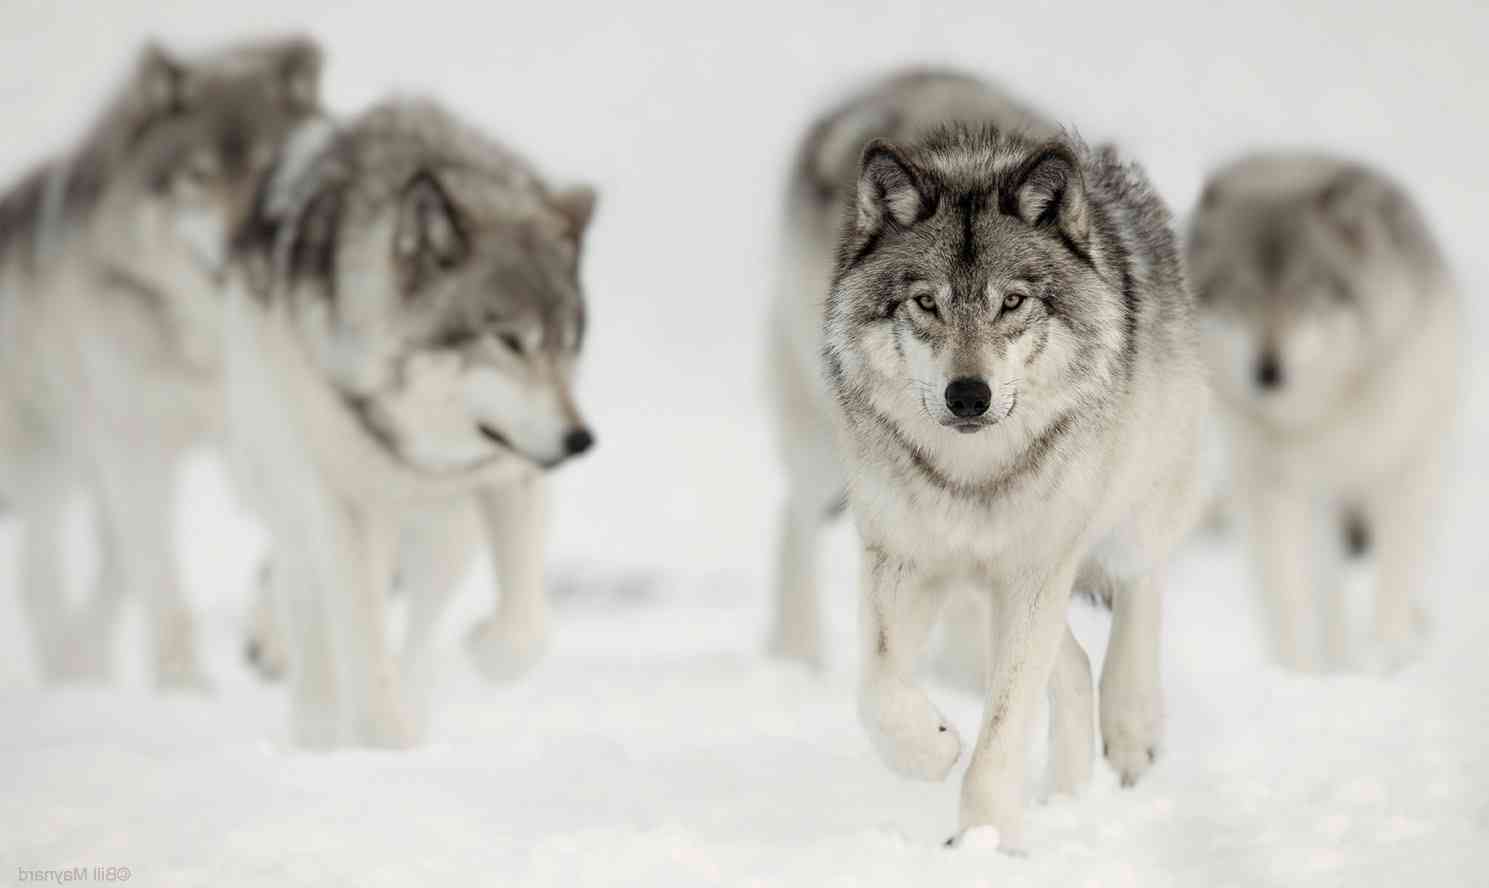 Gray Timber Wolves in snow